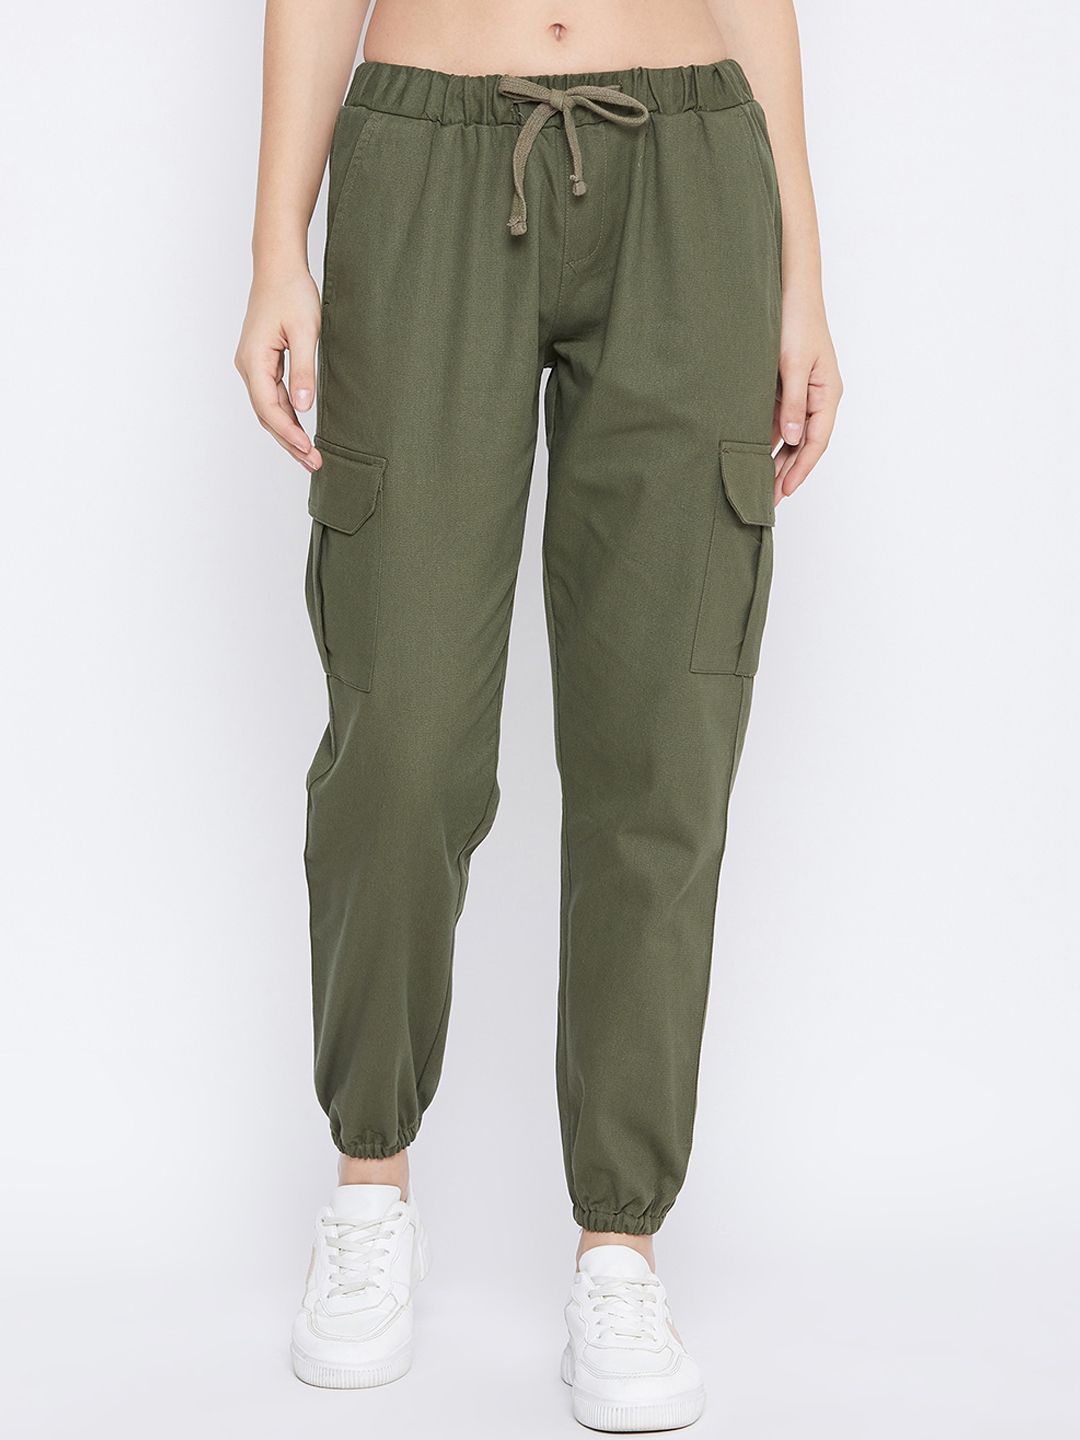 Q-rious Women Olive Green Pure Cotton Joggers Trousers Price in India